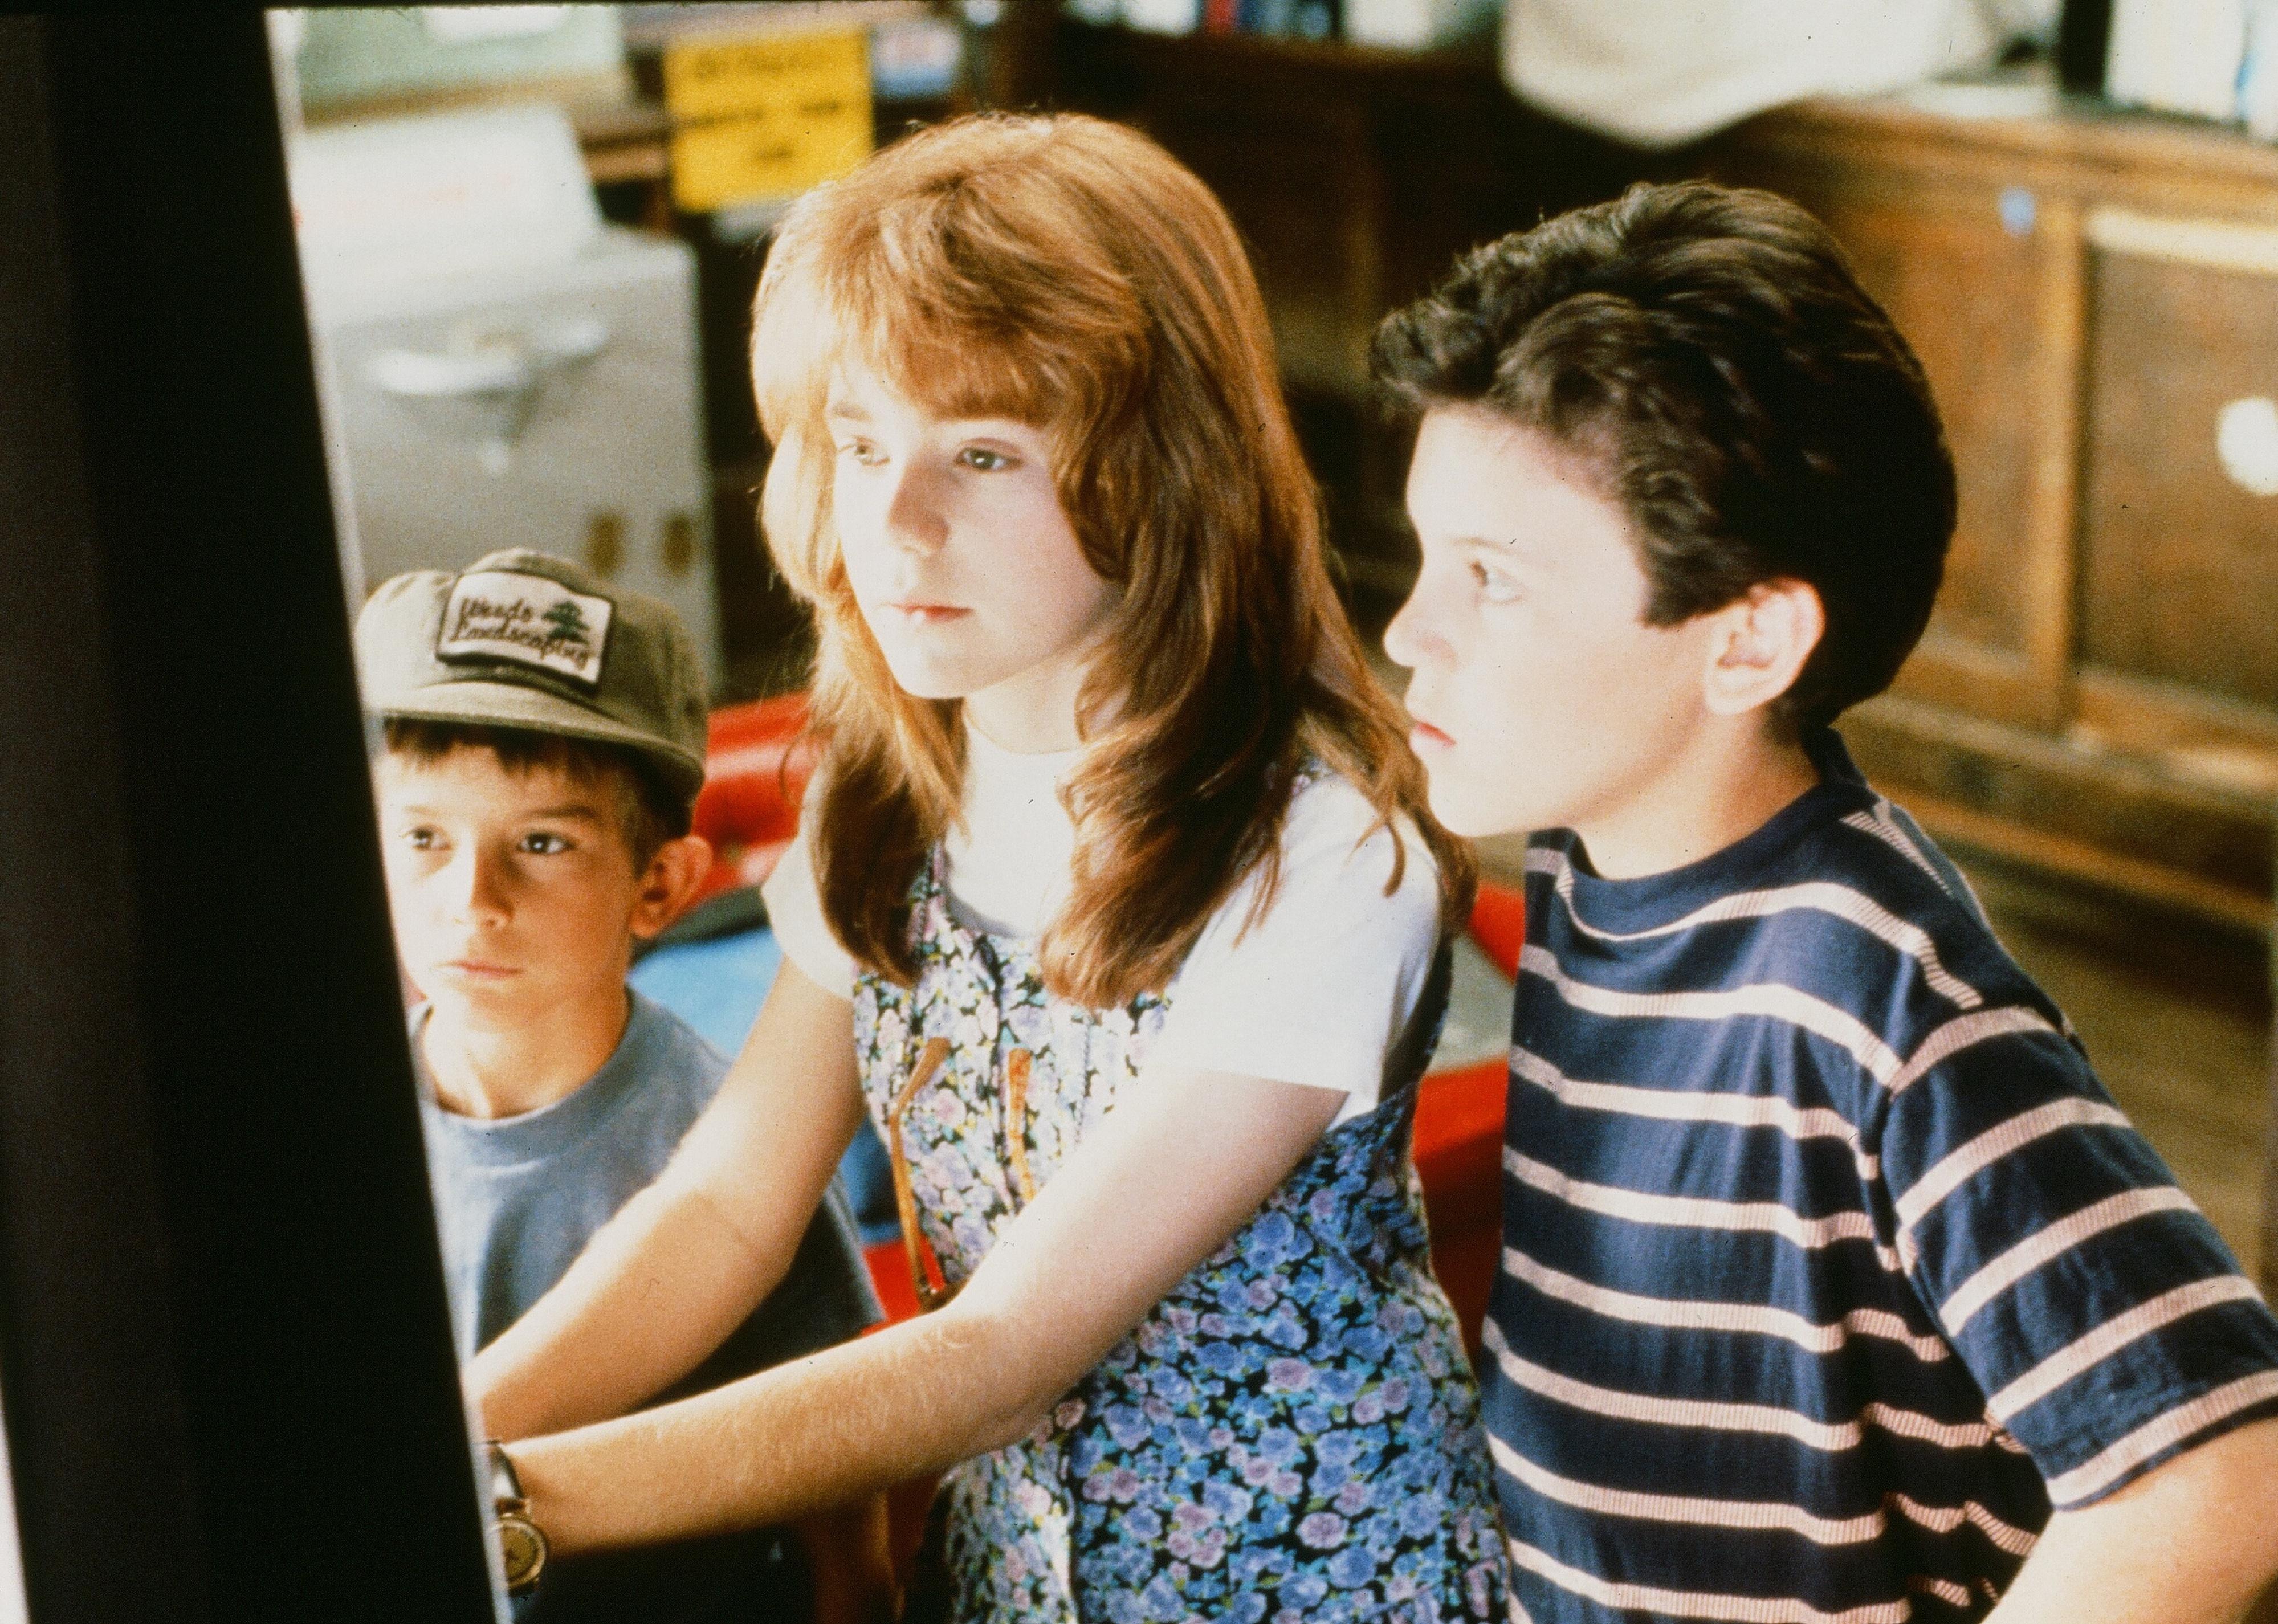 Luke Edwards, Jenny Lewis, and Fred Savage playing a game in a scene from the movie 